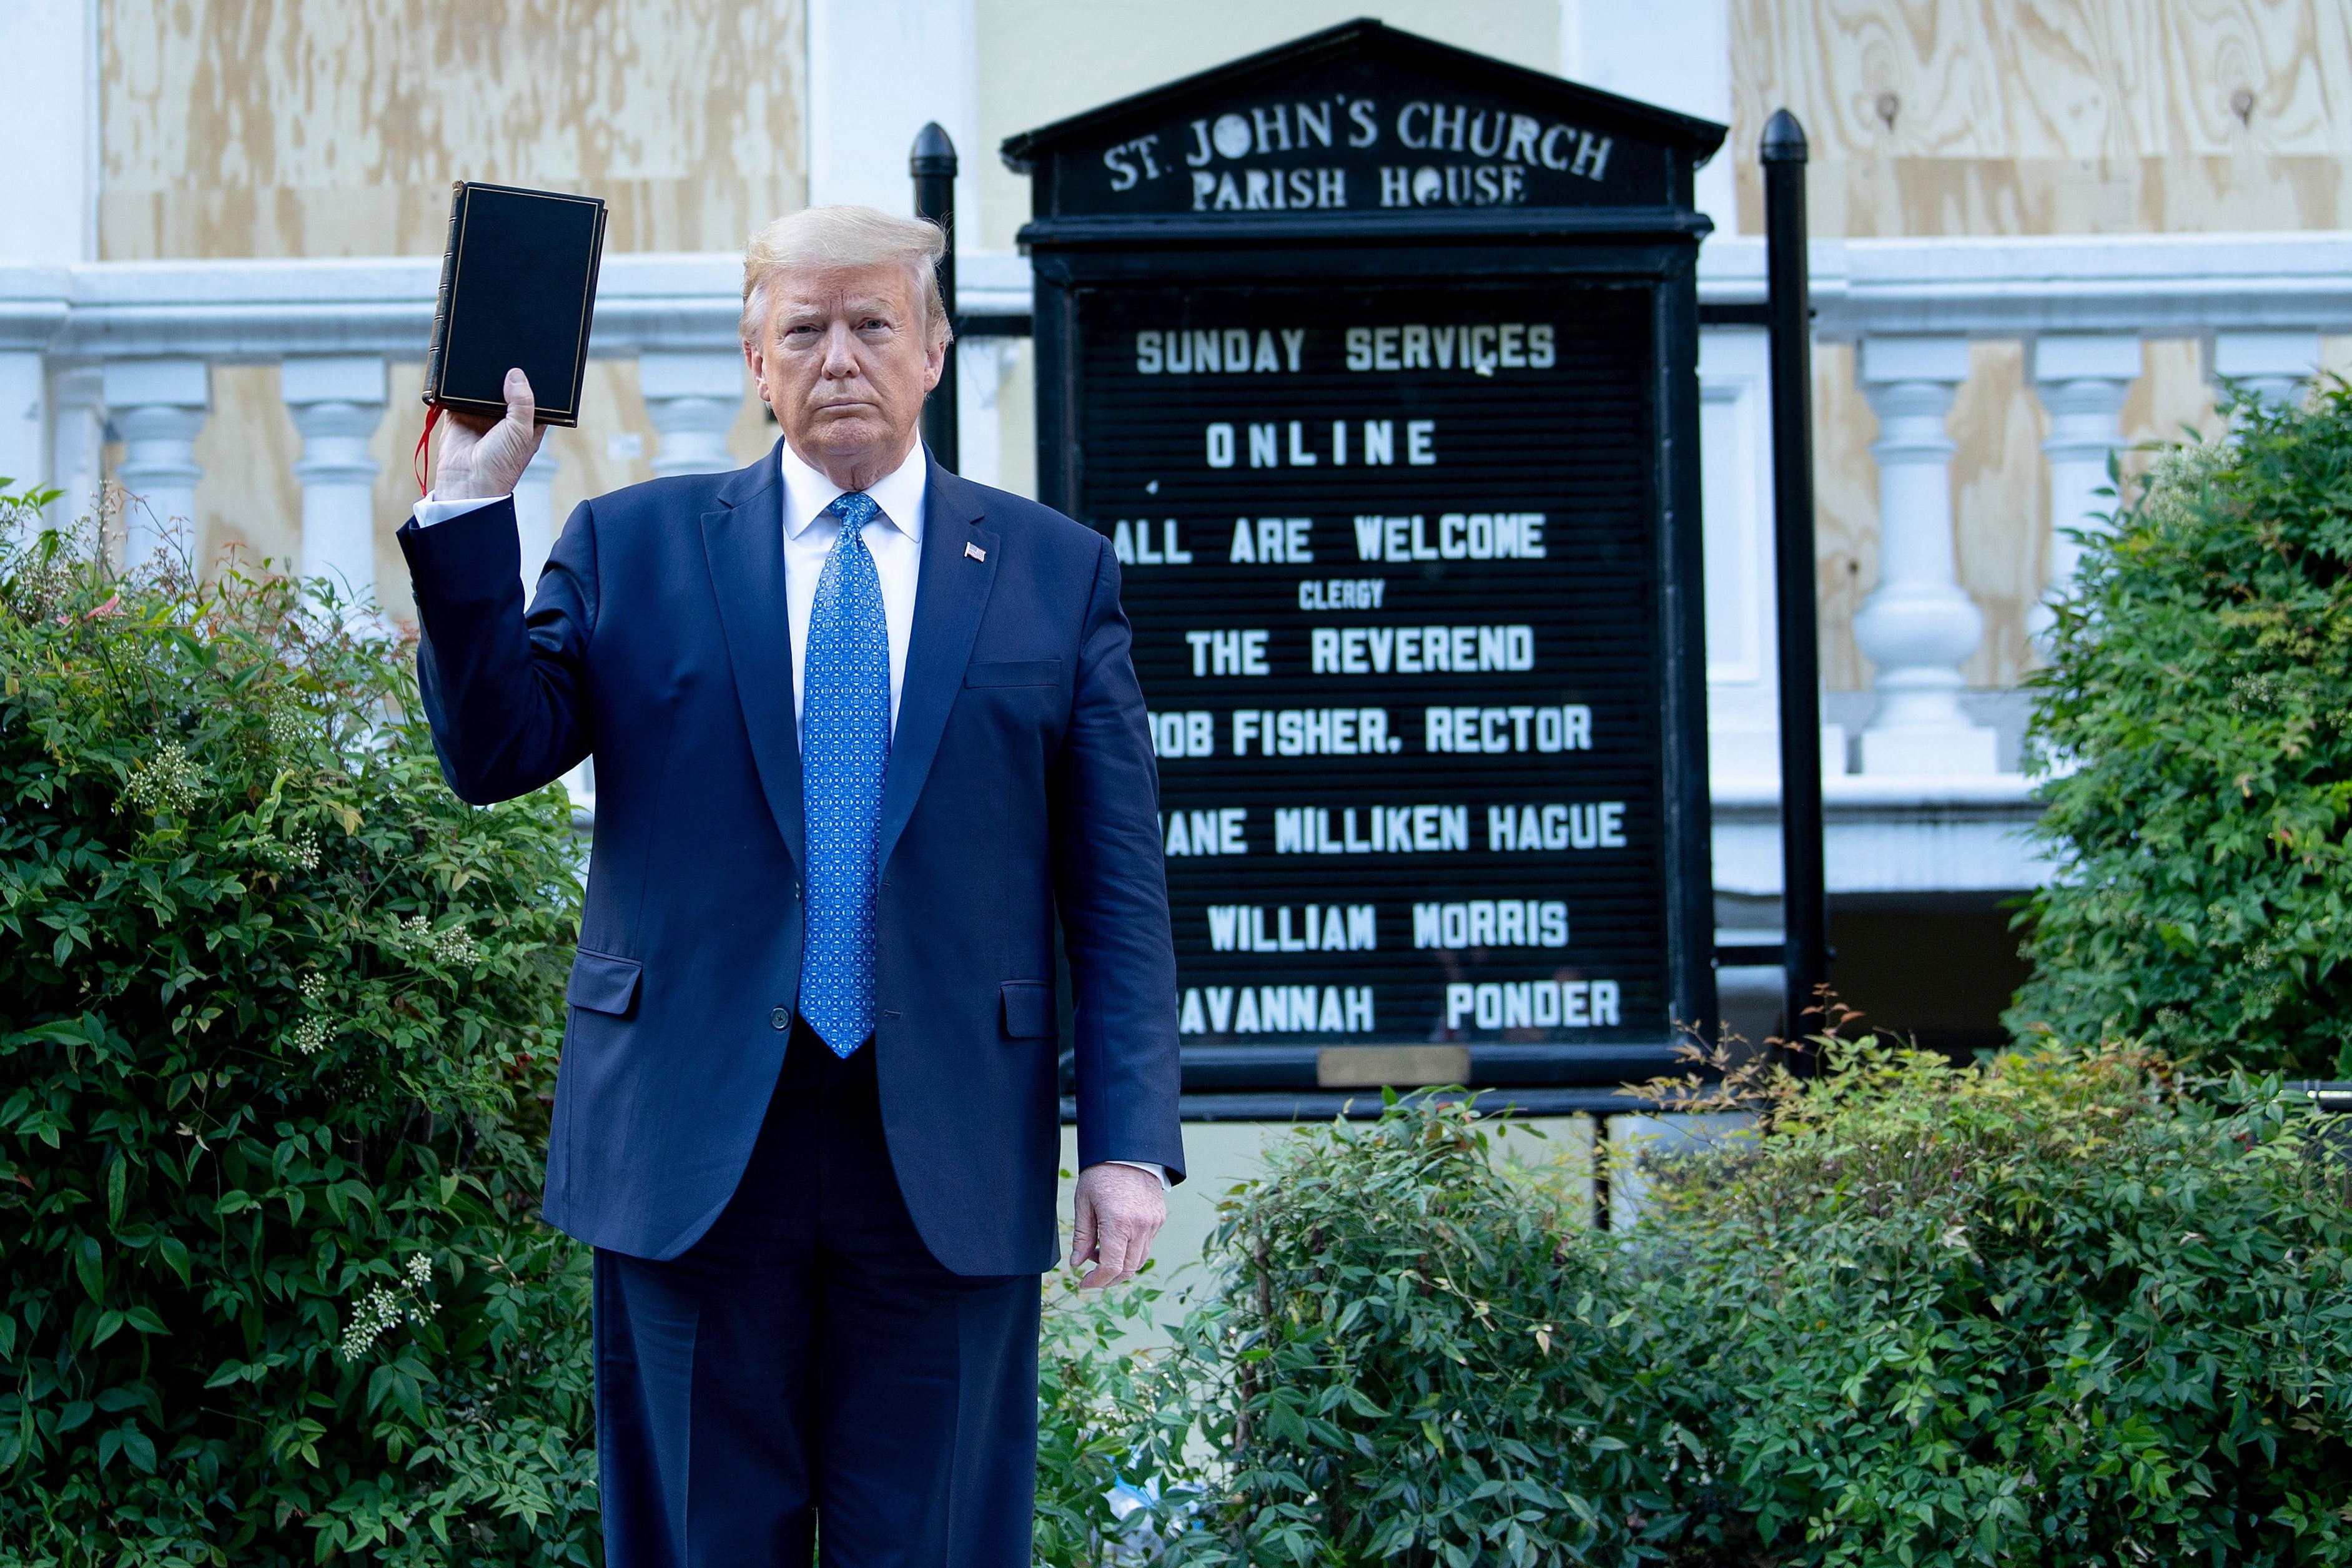 Then-President Donald Trump holds a Bible while visiting St. John's Church across from the White House after the area was cleared of people protesting the death of George Floyd June 1, 2020, in Washington, D.C.The White House announced that the president would make remarks imminently after he has been criticized for not publicly addressing in the crisis in recent days. (Photo by Brendan Smialowski / AFP) (Photo by BRENDAN SMIALOWSKI/AFP via Getty Images)